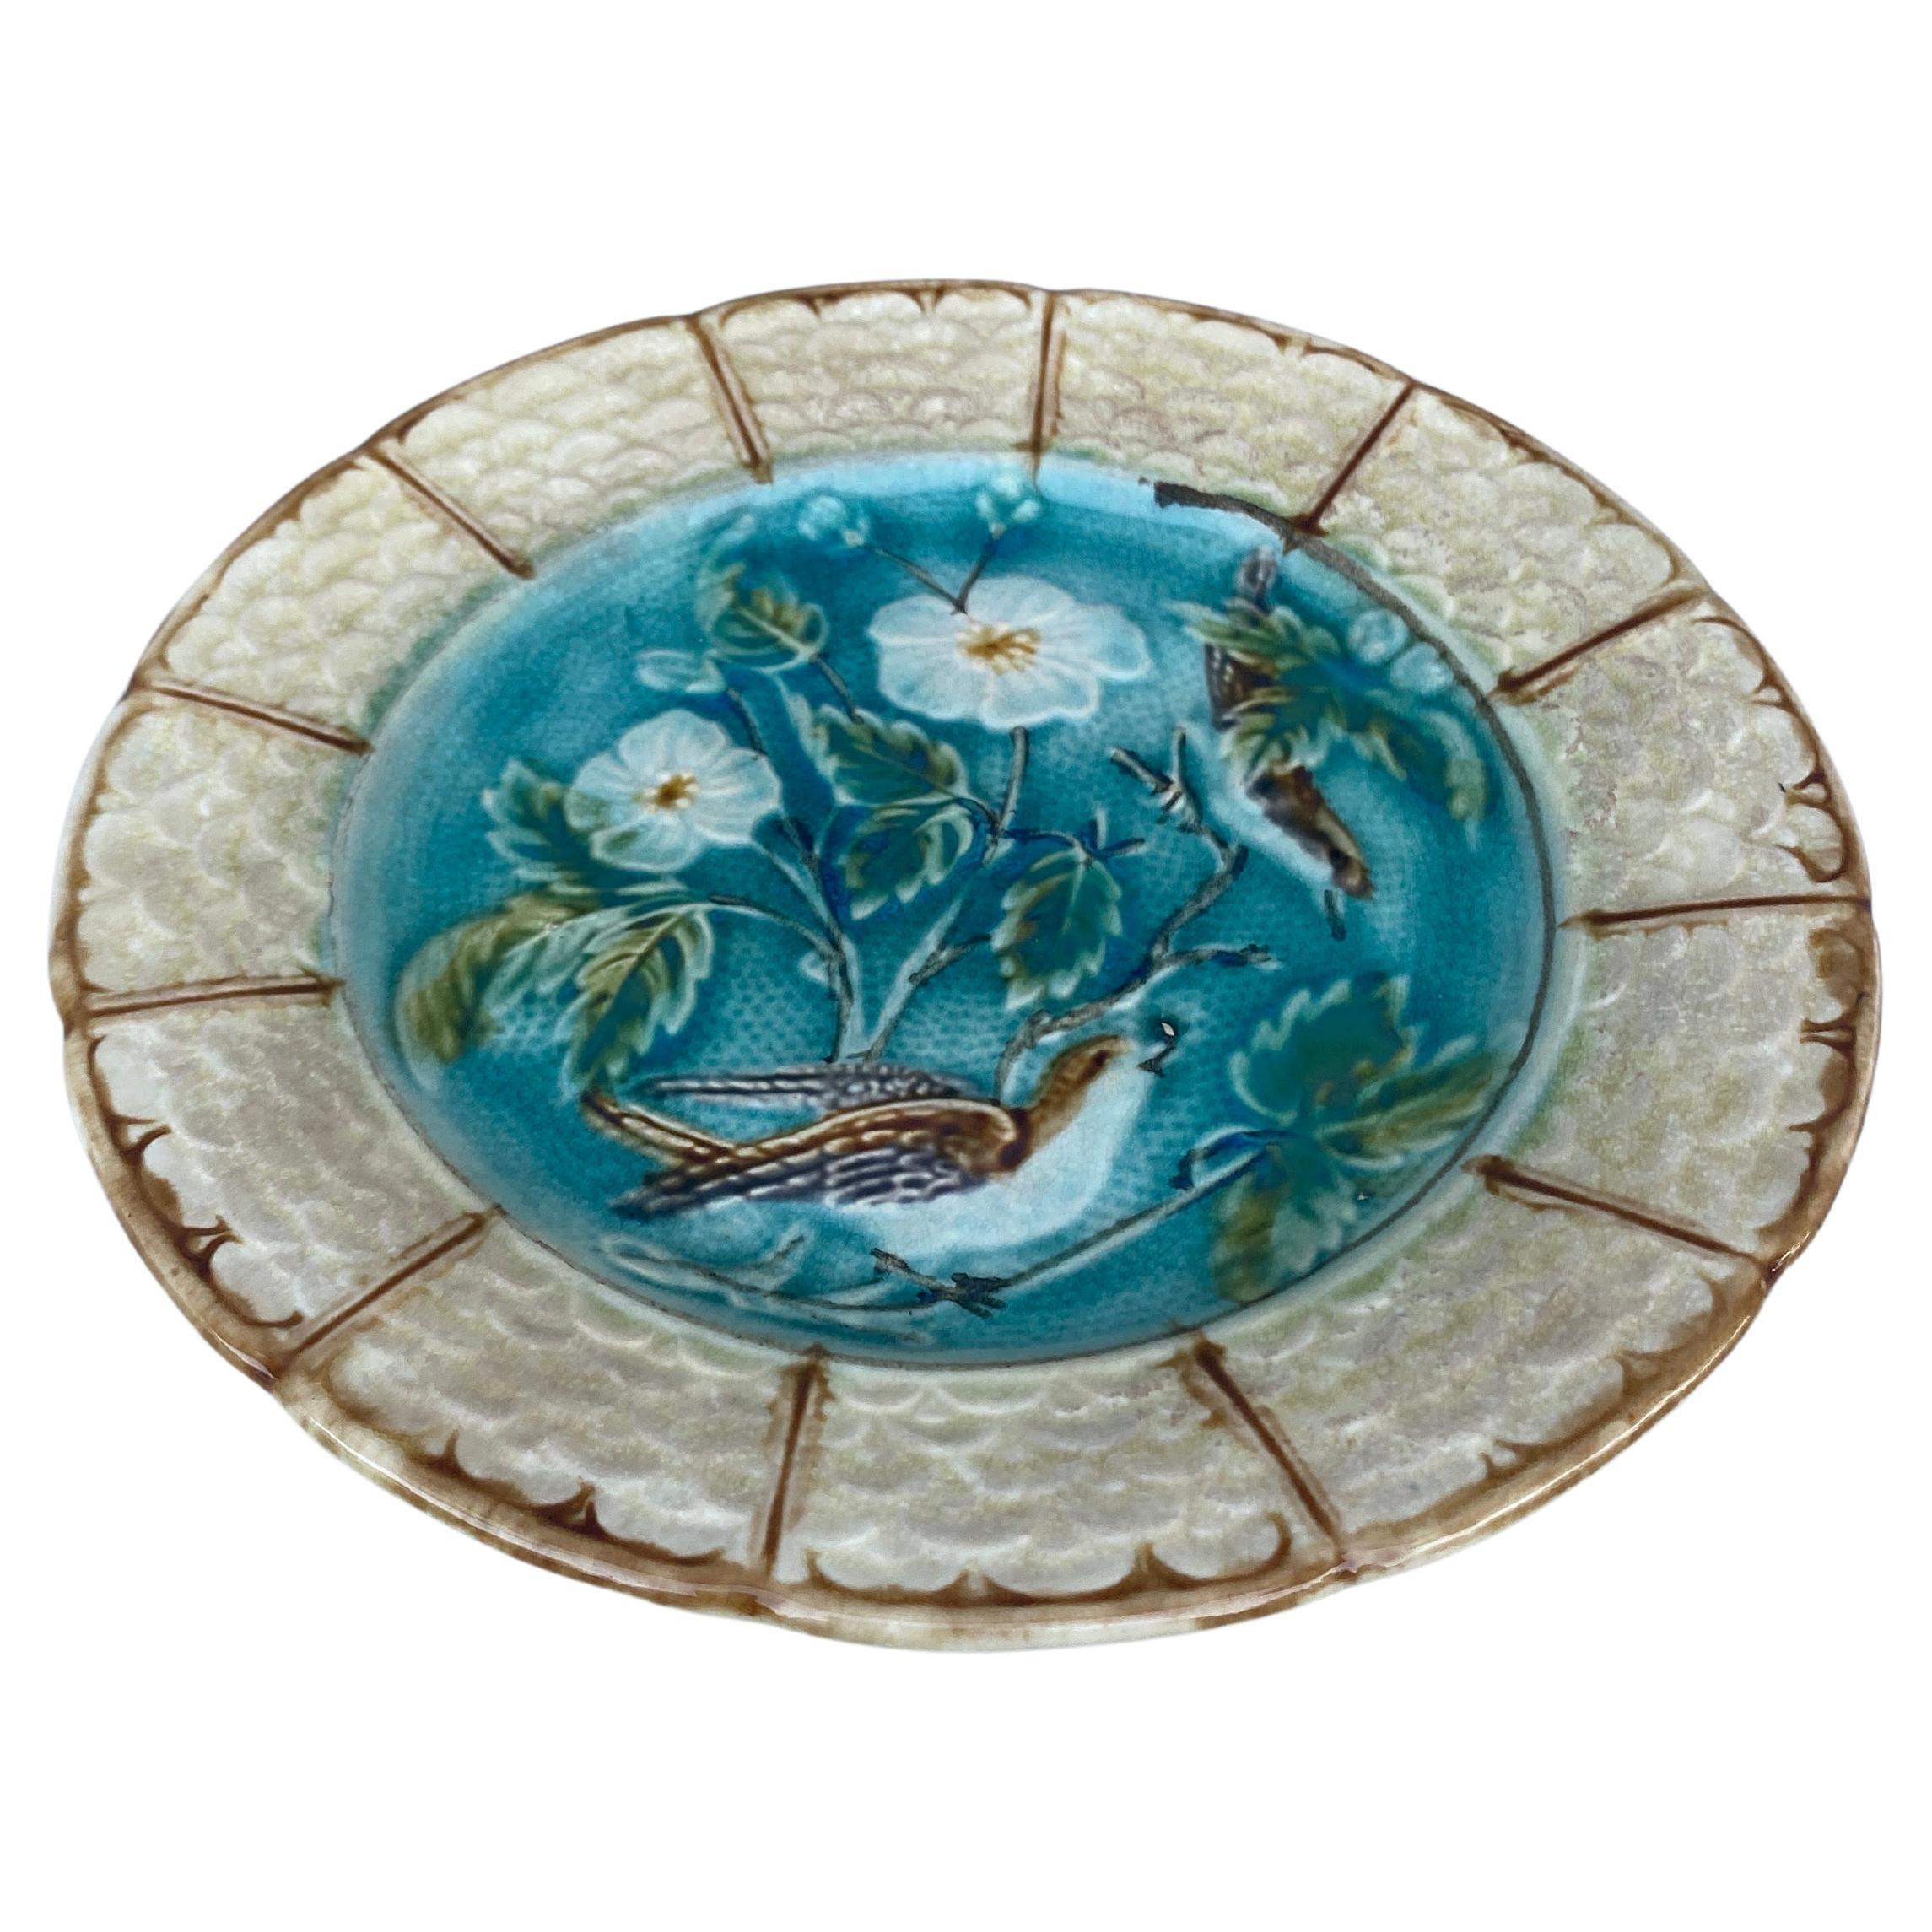 French majolica plate with bird & white flowers Onnaing, circa 1890.